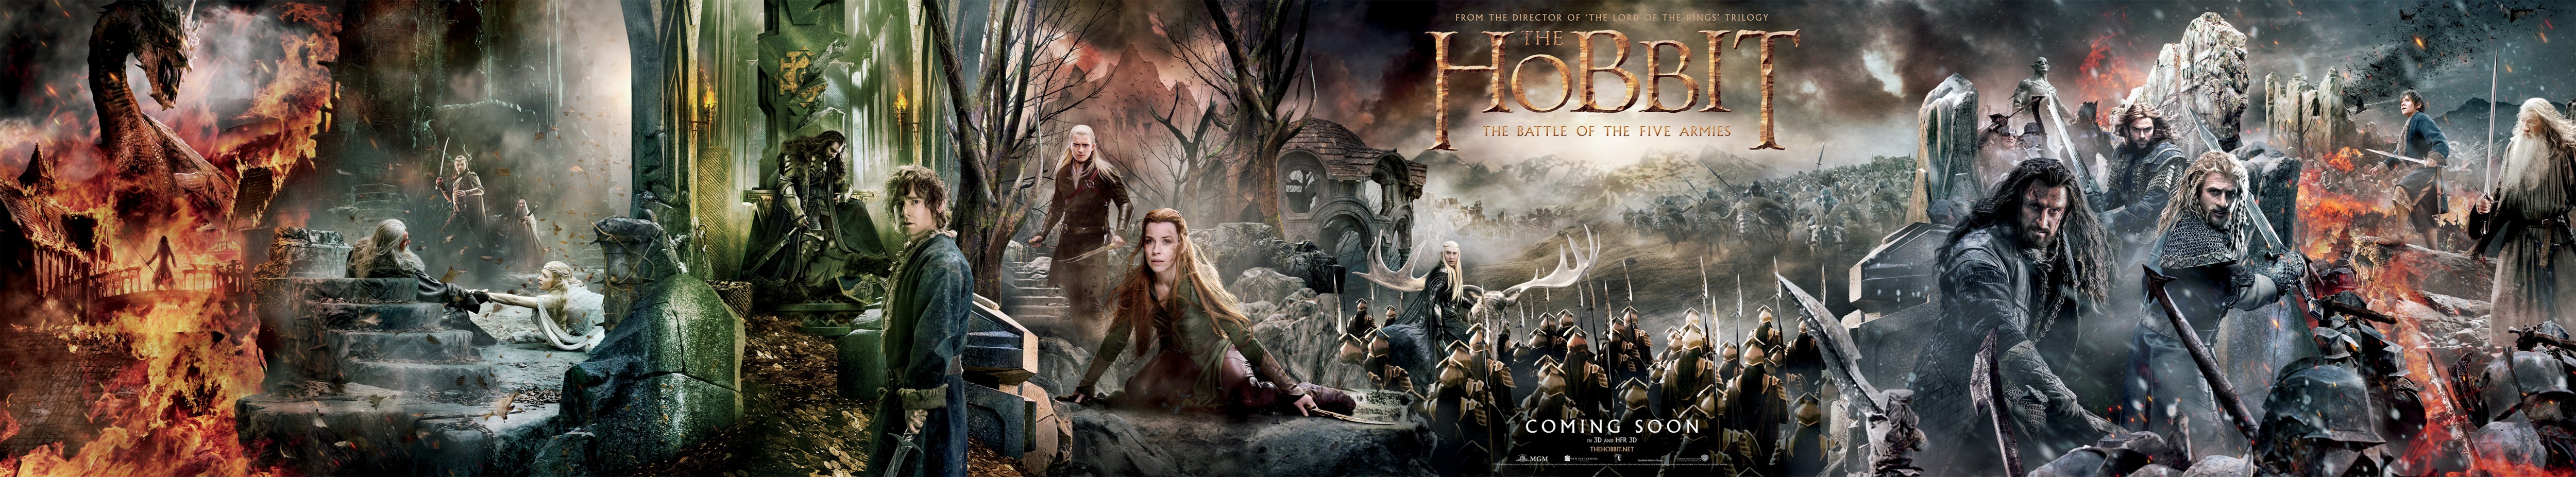 The Hobbit: The Battle of the Five Ar download the last version for ipod